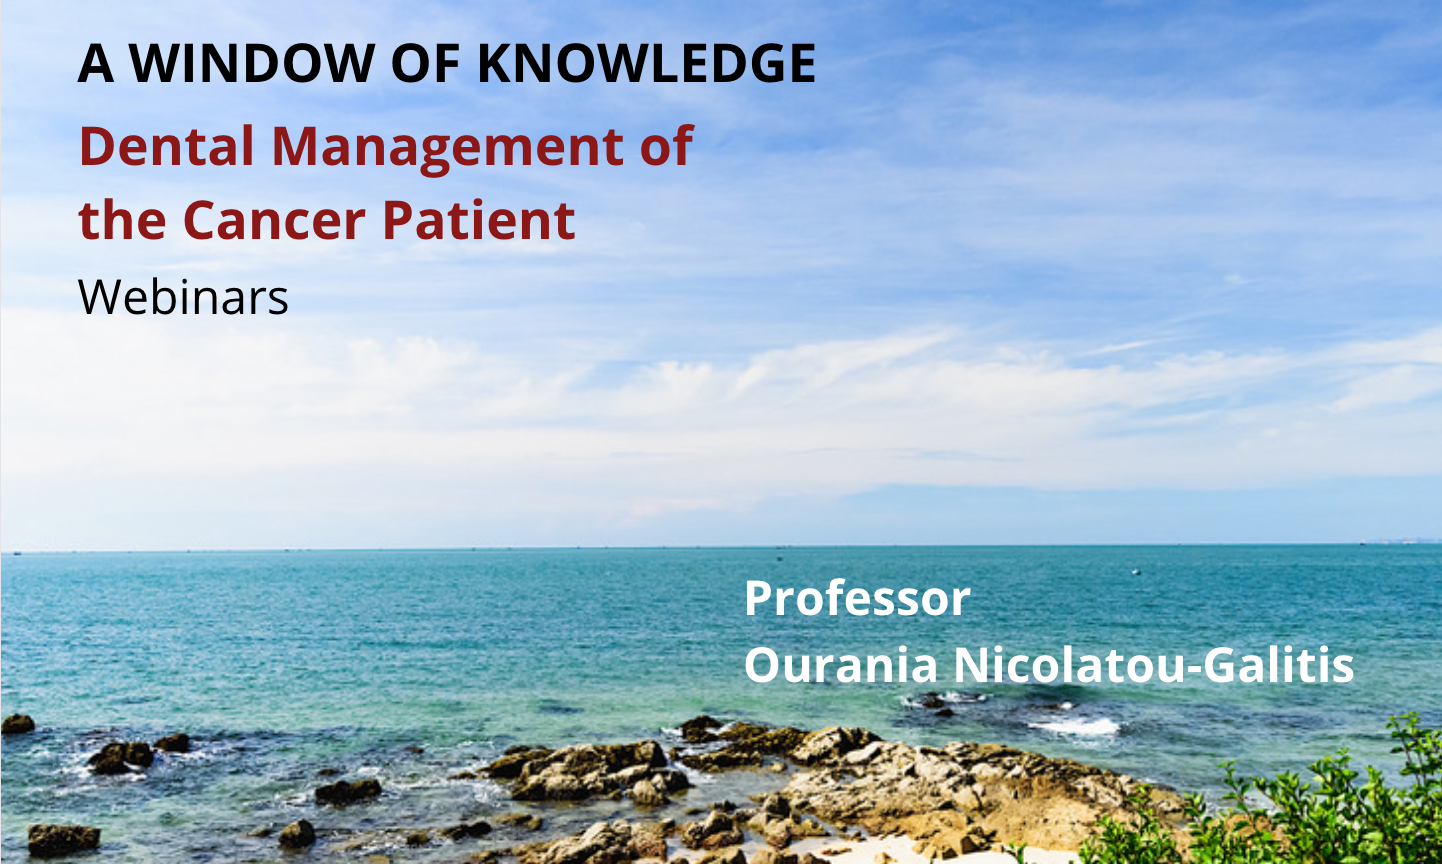 Webinar: A window of knowledge, Dental Management of the Cancer Patient